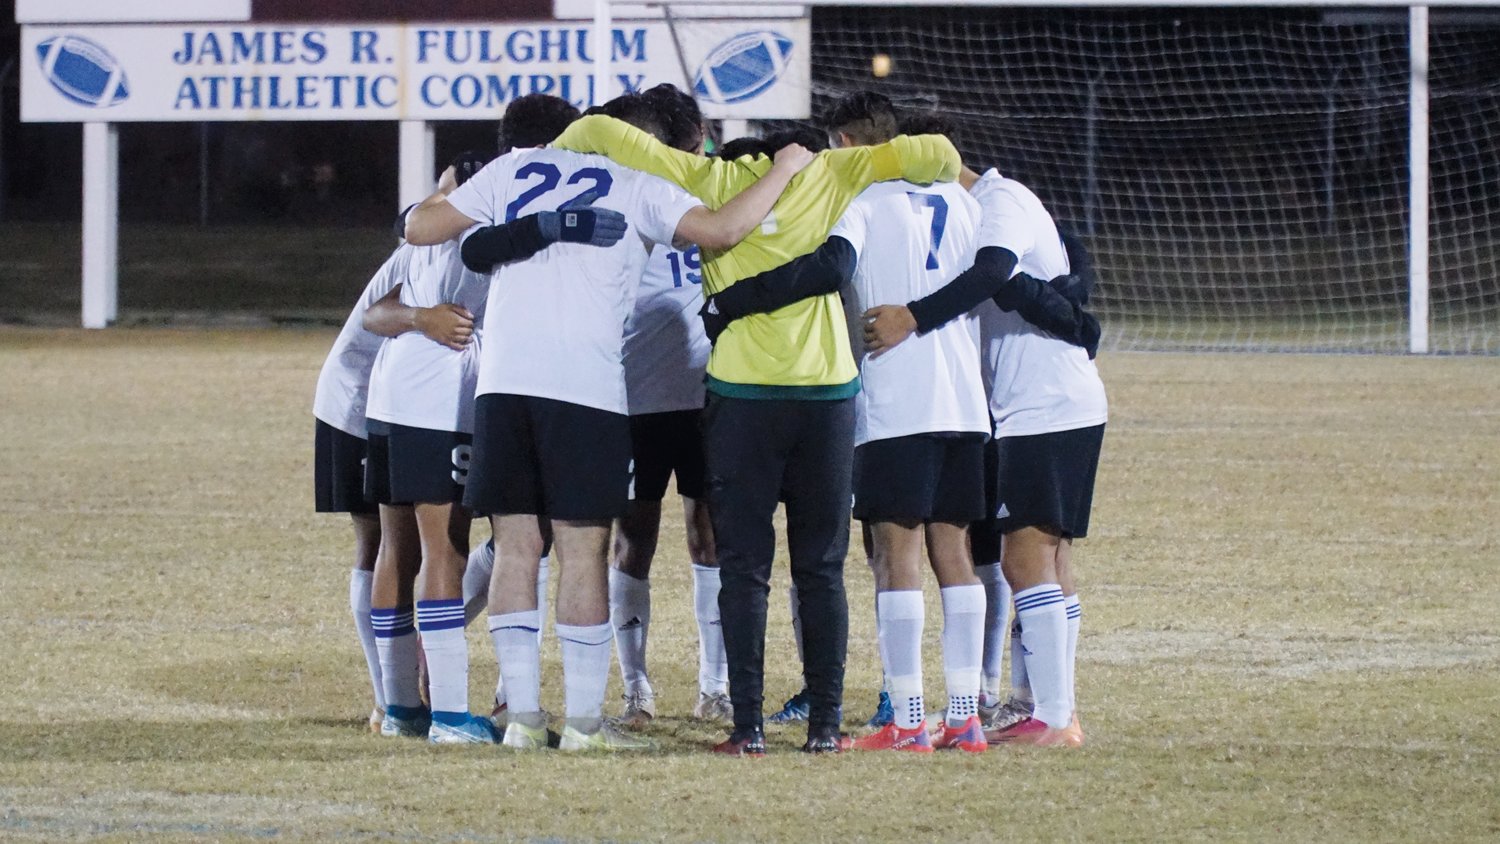 The Jordan-Matthews men's soccer team huddles together just before their fourth-round playoff game against the Greene Central Rams in Snow Hill last Wednesday. The Jets went on to lose the game, 3-1, putting an end to its previously unbeaten season with a 20-1-1 overall record.